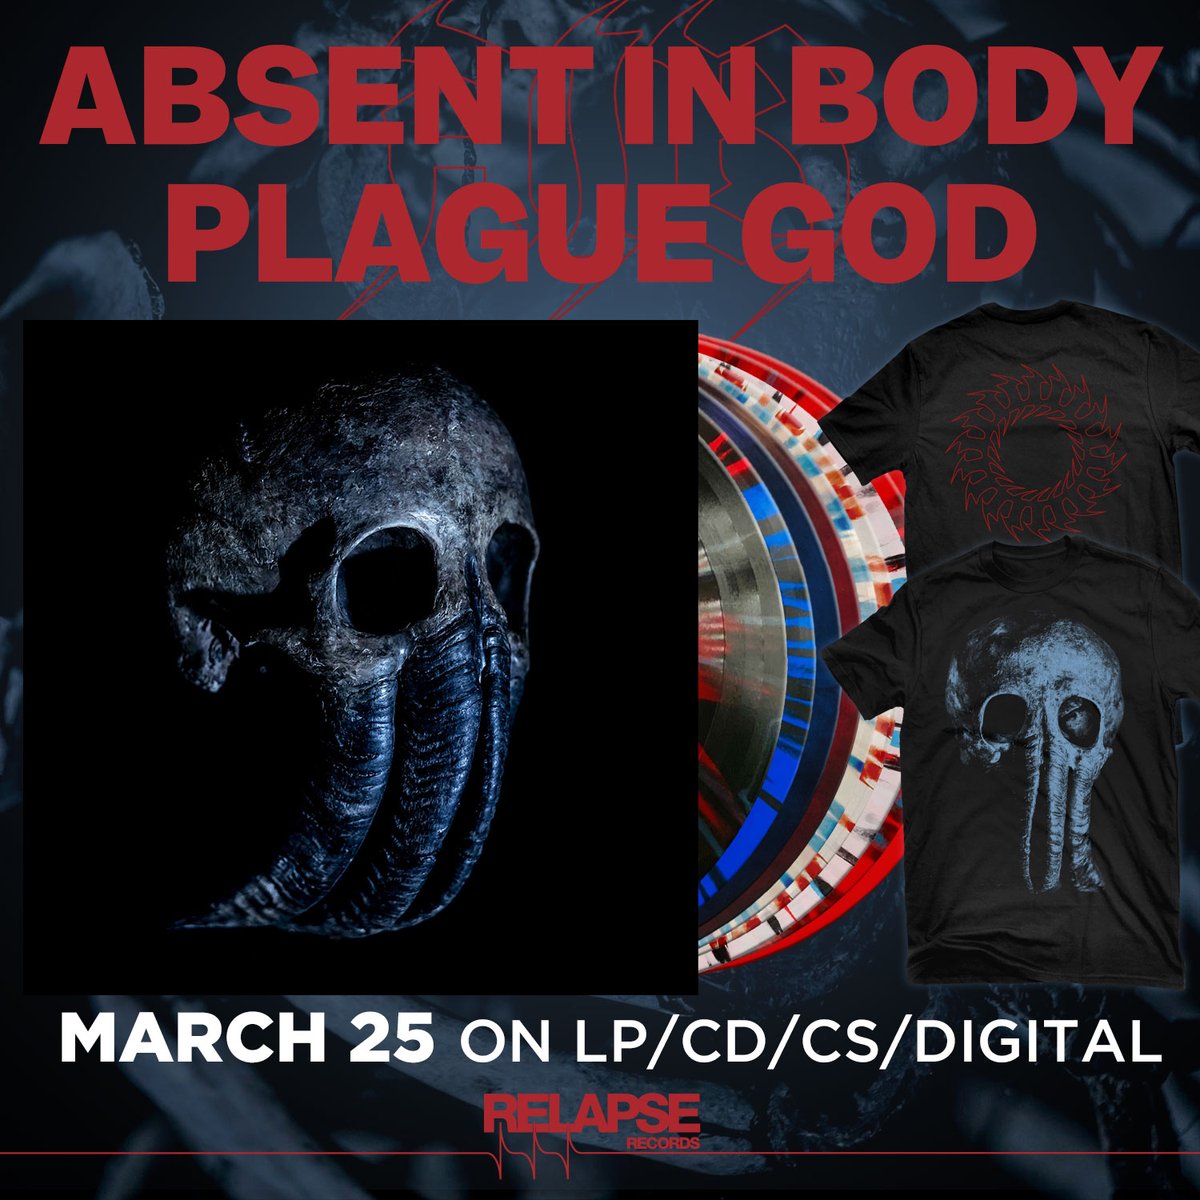 ABSENT IN BODY (ft. current and former members of #AMENRA, #NEUROSIS, #SEPULTURA) announce their terrifying debut album 'Plague God' out March 25 on LP/CD/CS/Digital. Watch 'The Acres/The Ache' video at pre-order at orcd.co/absentinbody